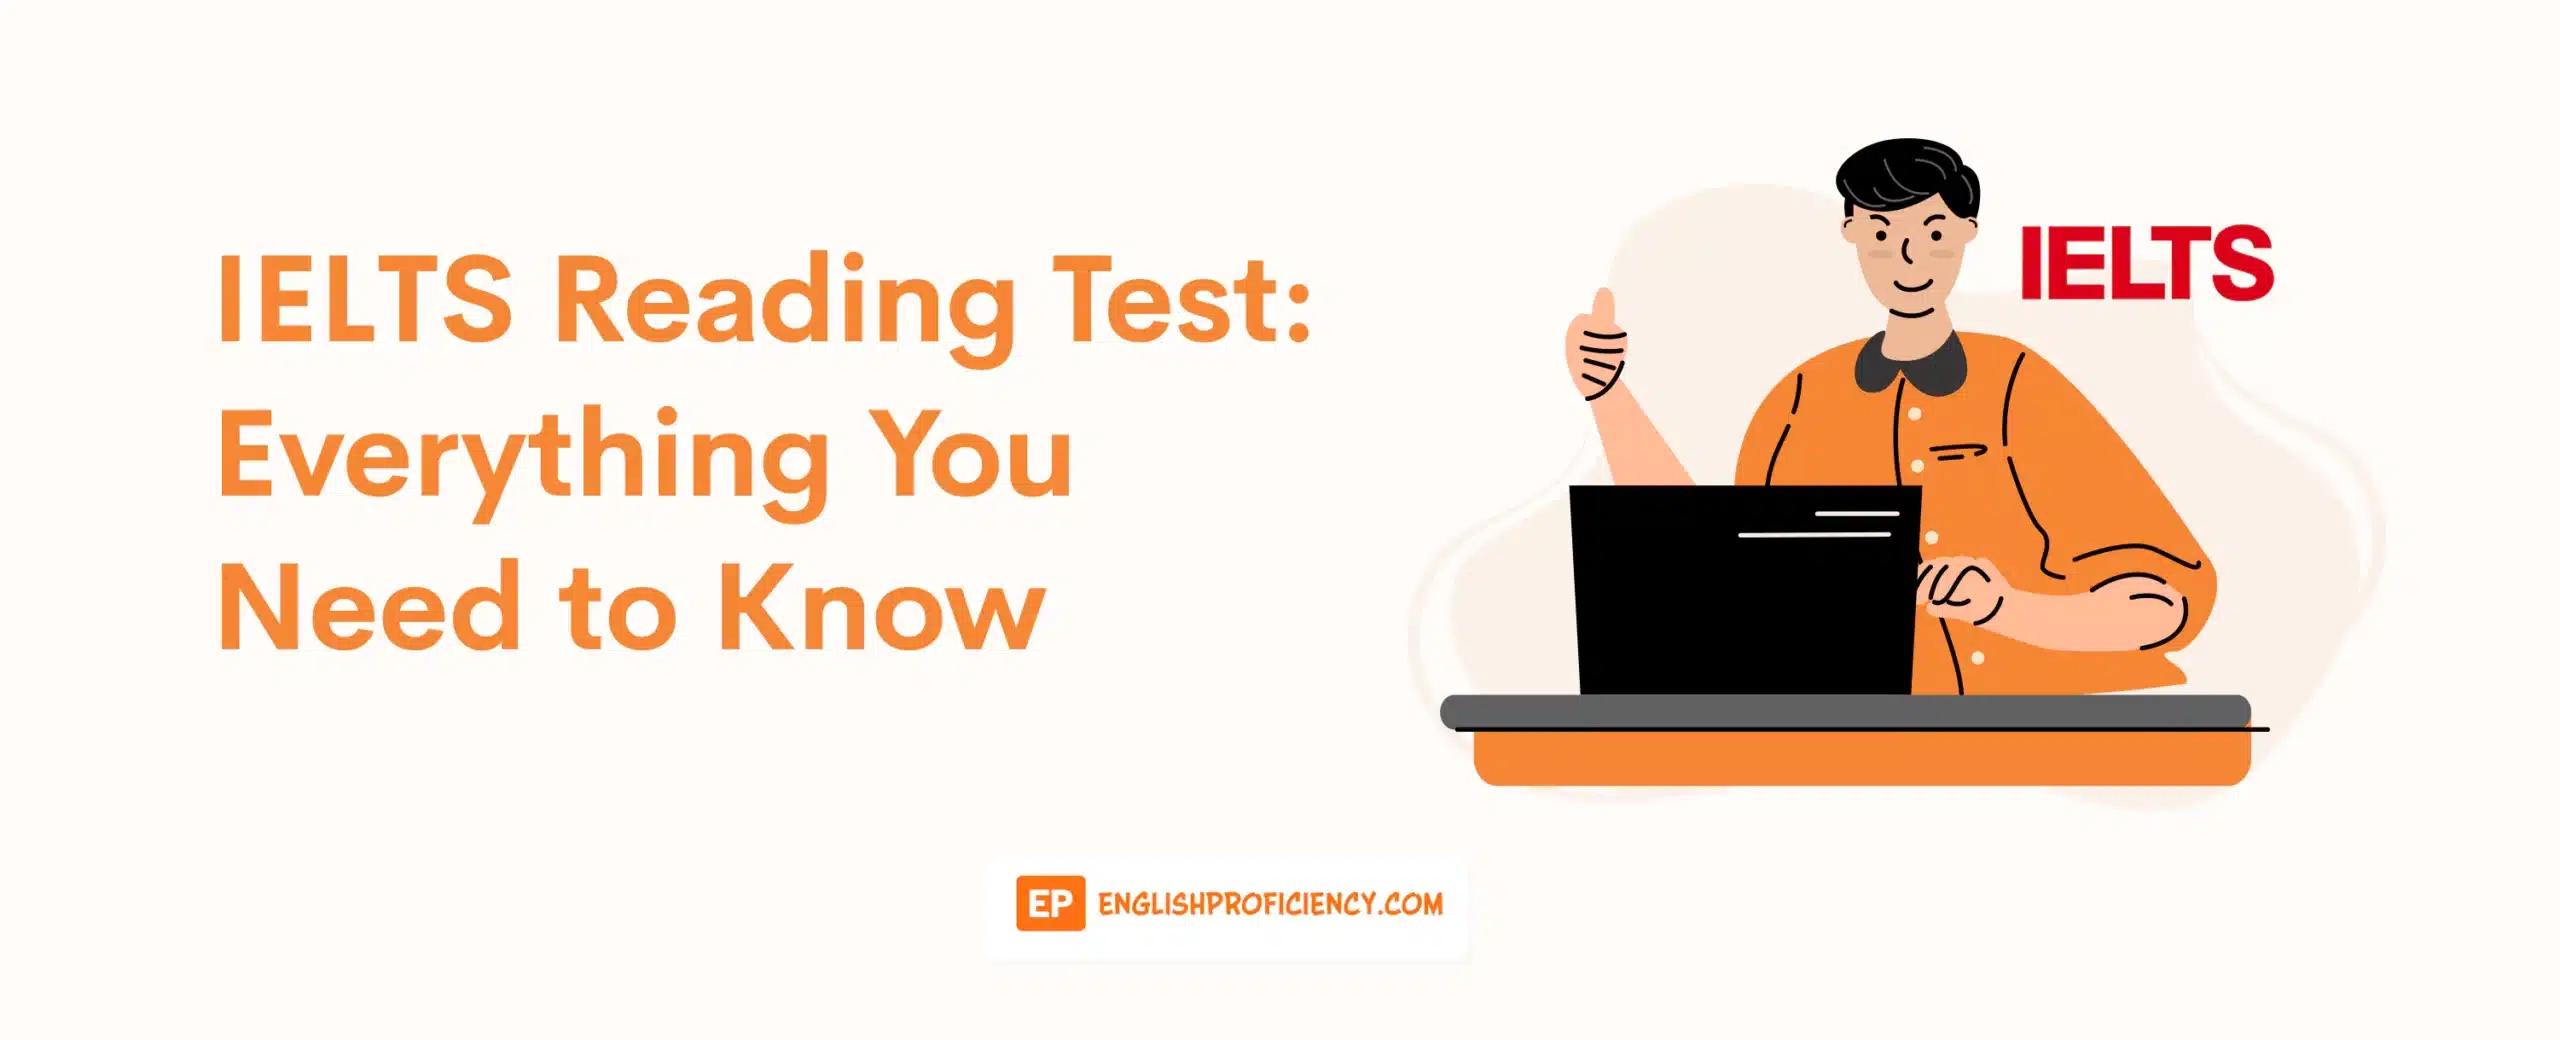 IELTS Reading Test Everything You Need to Know